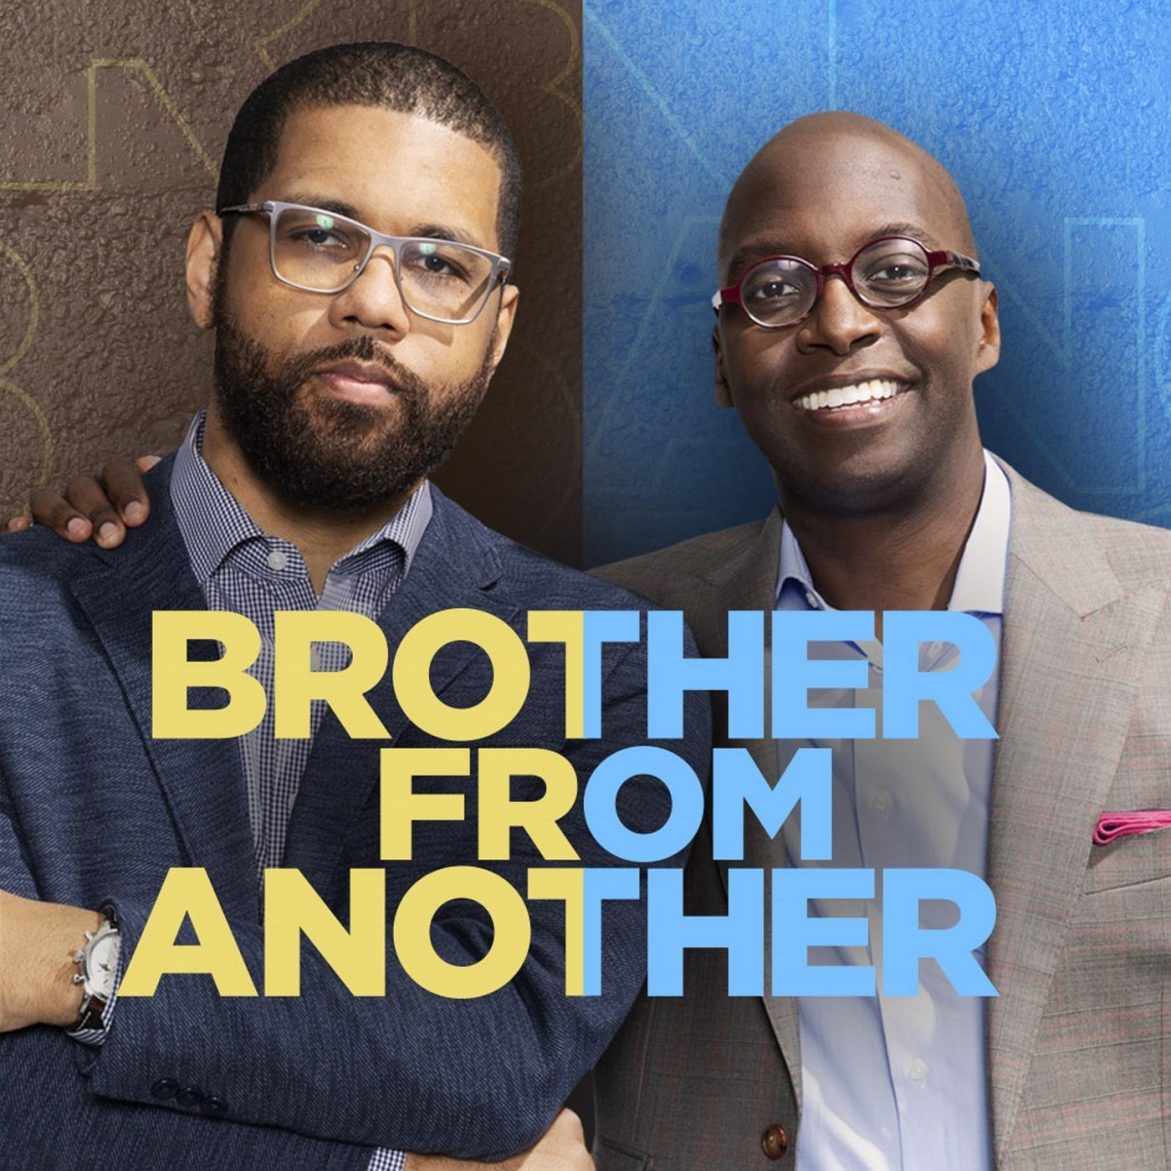 Black Podcasting - "The Other Brother From Another"